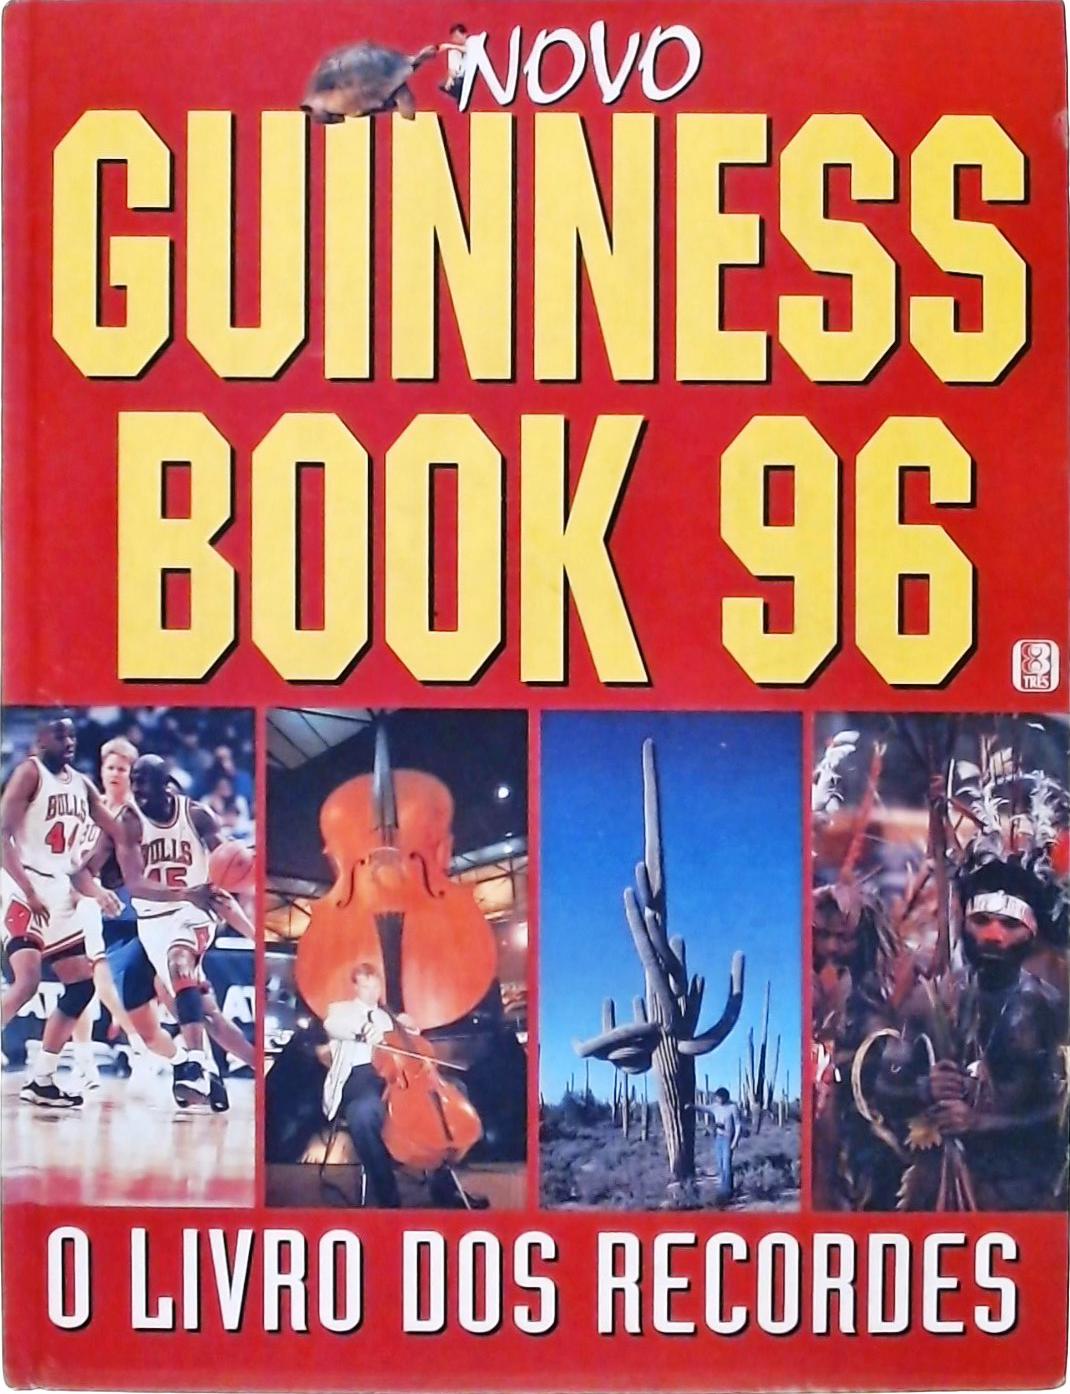 Guiness Book 96